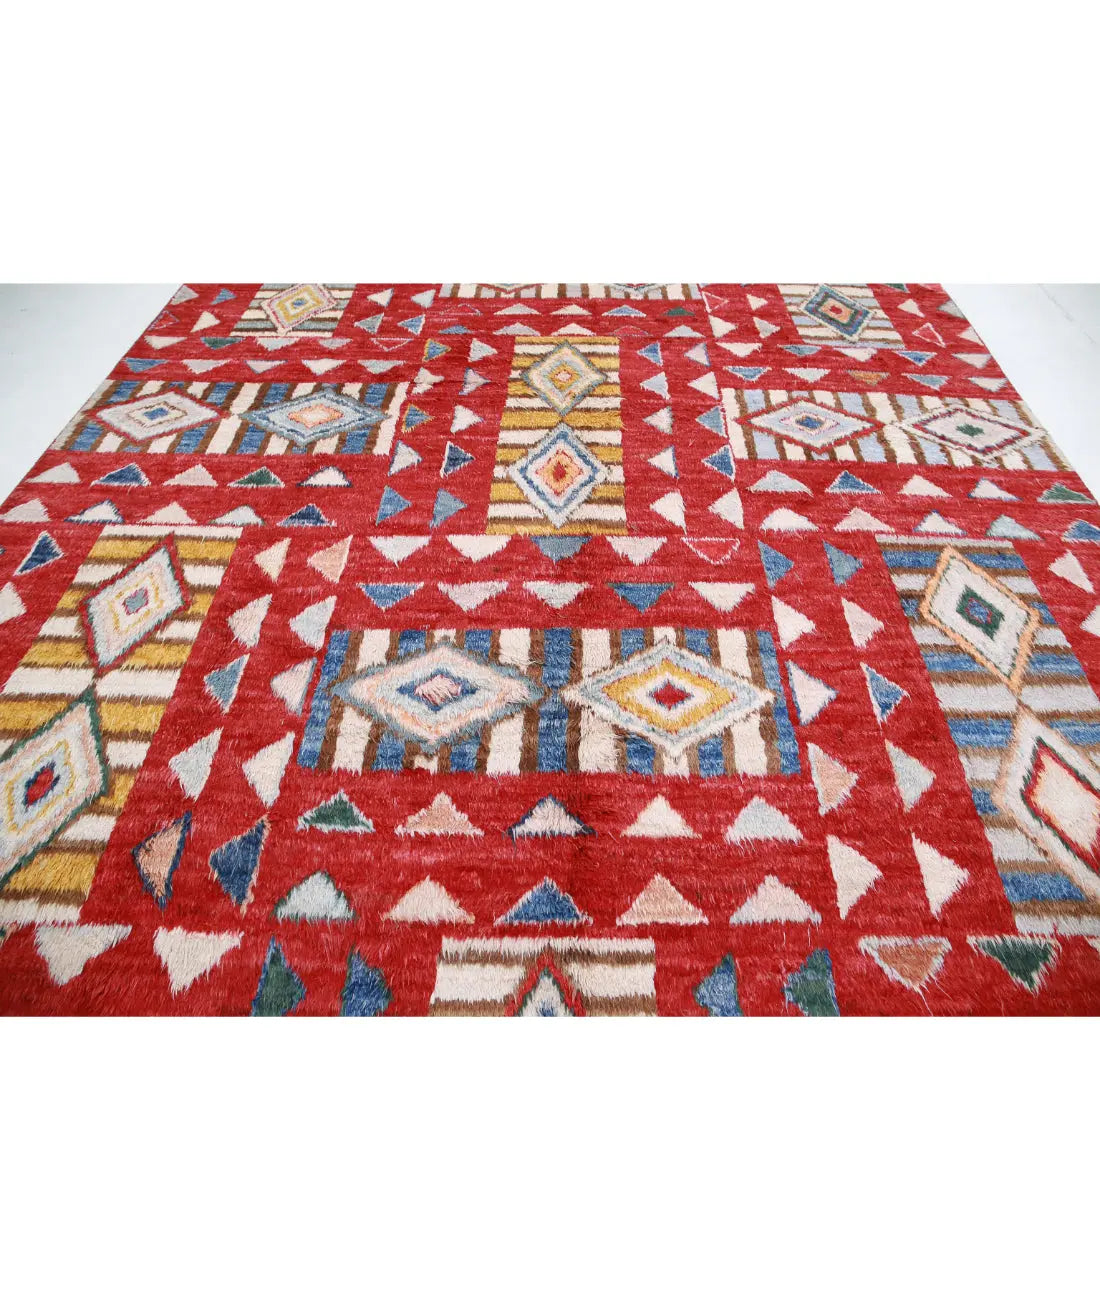 Hand Knotted Tribal Moroccan Wool Rug - 10'6'' x 13'9''